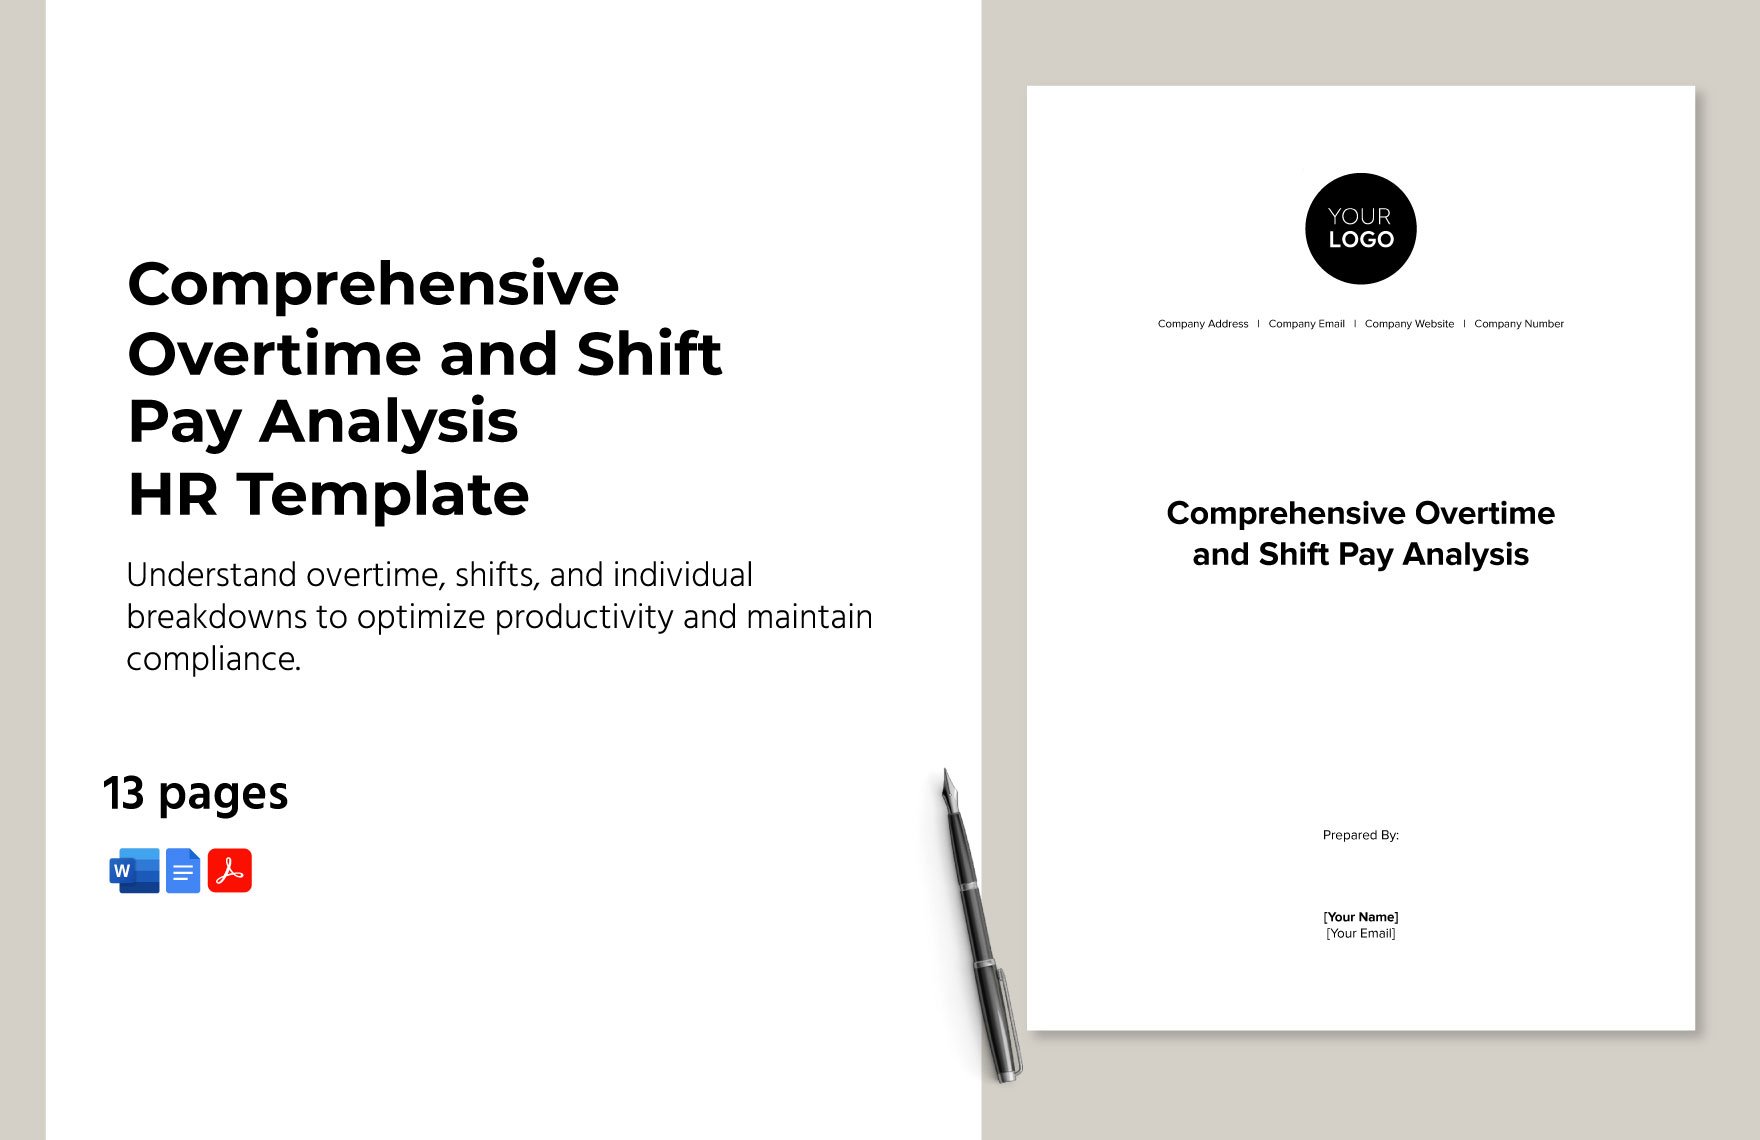 Comprehensive Overtime and Shift Pay Analysis HR Template